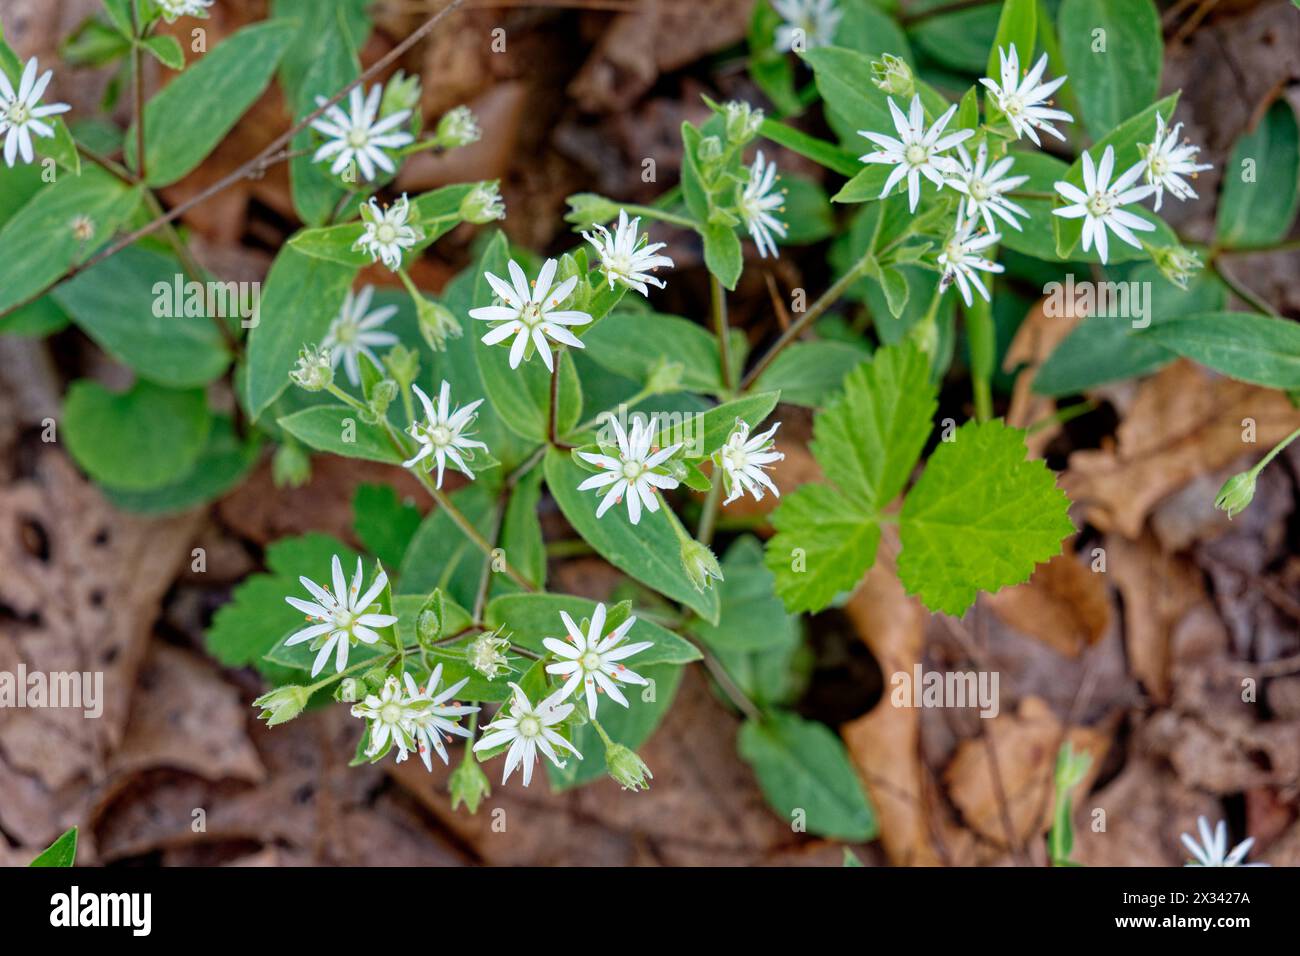 Looking down on the top of a star chickweed plant in bloom with little white flowers on stems going to the foliage and more to open emerging from the Stock Photo